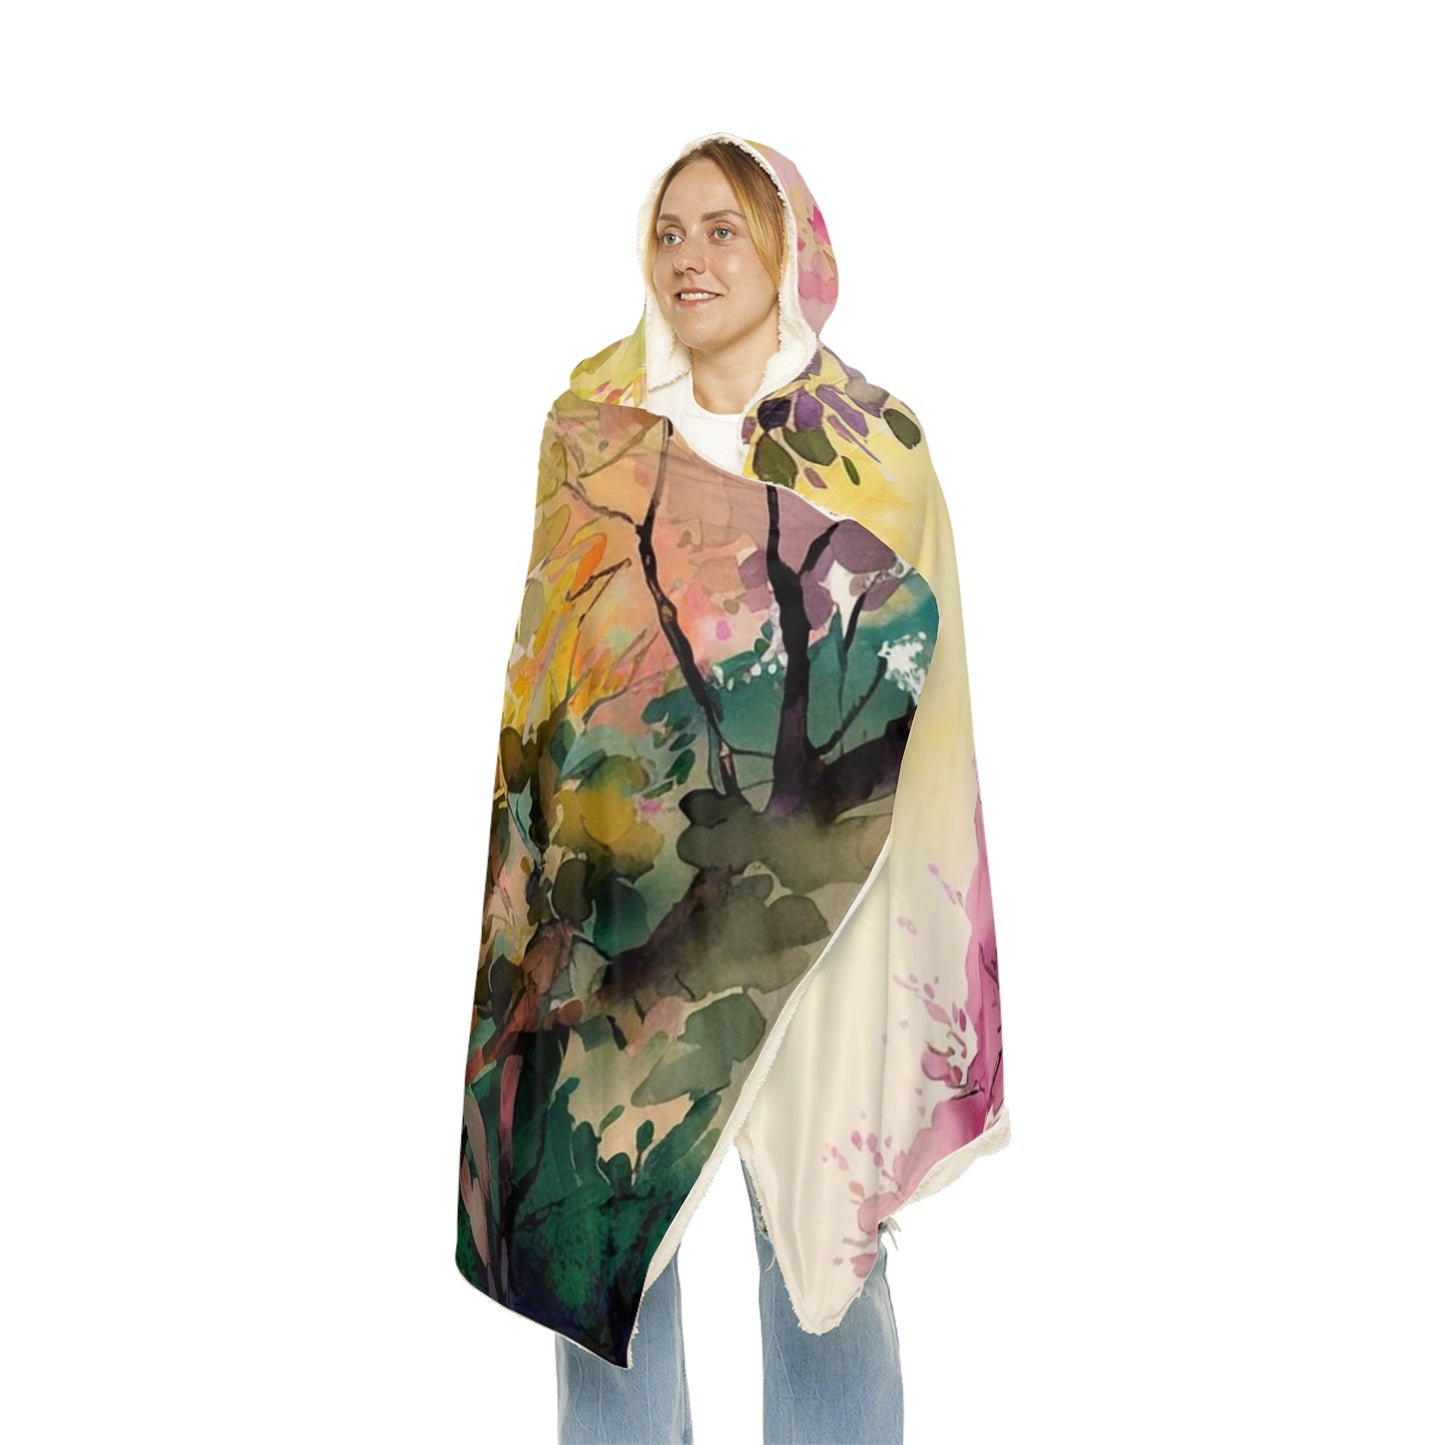 Snuggle Hooded Blanket Mother Nature Bright Spring Colors Realistic Watercolor 2